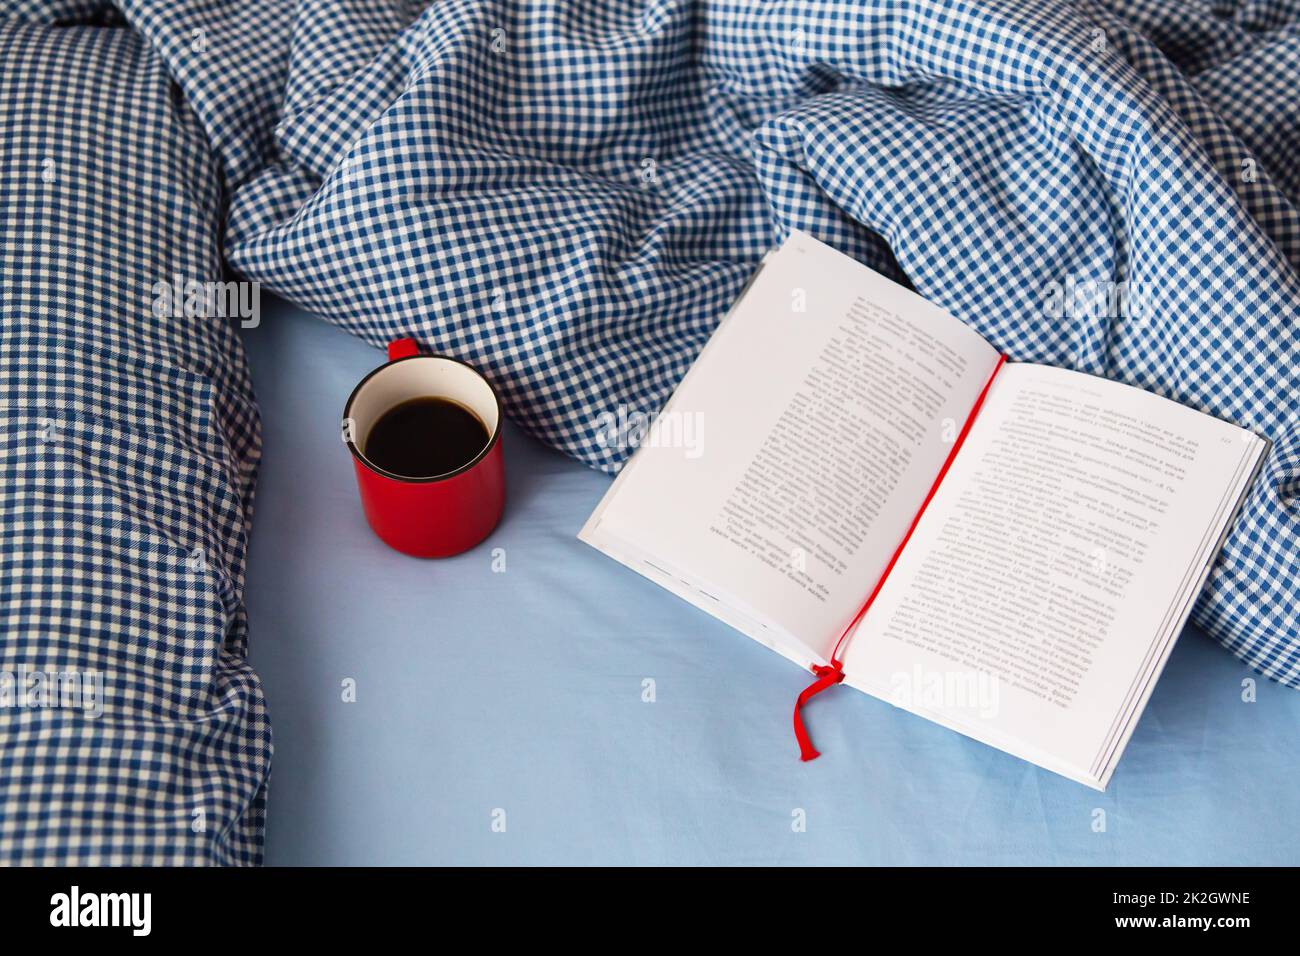 Ukraine, Rivne - August 11, 2021: Top view of a cozy blanket, an open book and a hot red cup of coffee on the bed on a cold winter day. Relaxation and hygge concept. Top view with copy space. Stock Photo